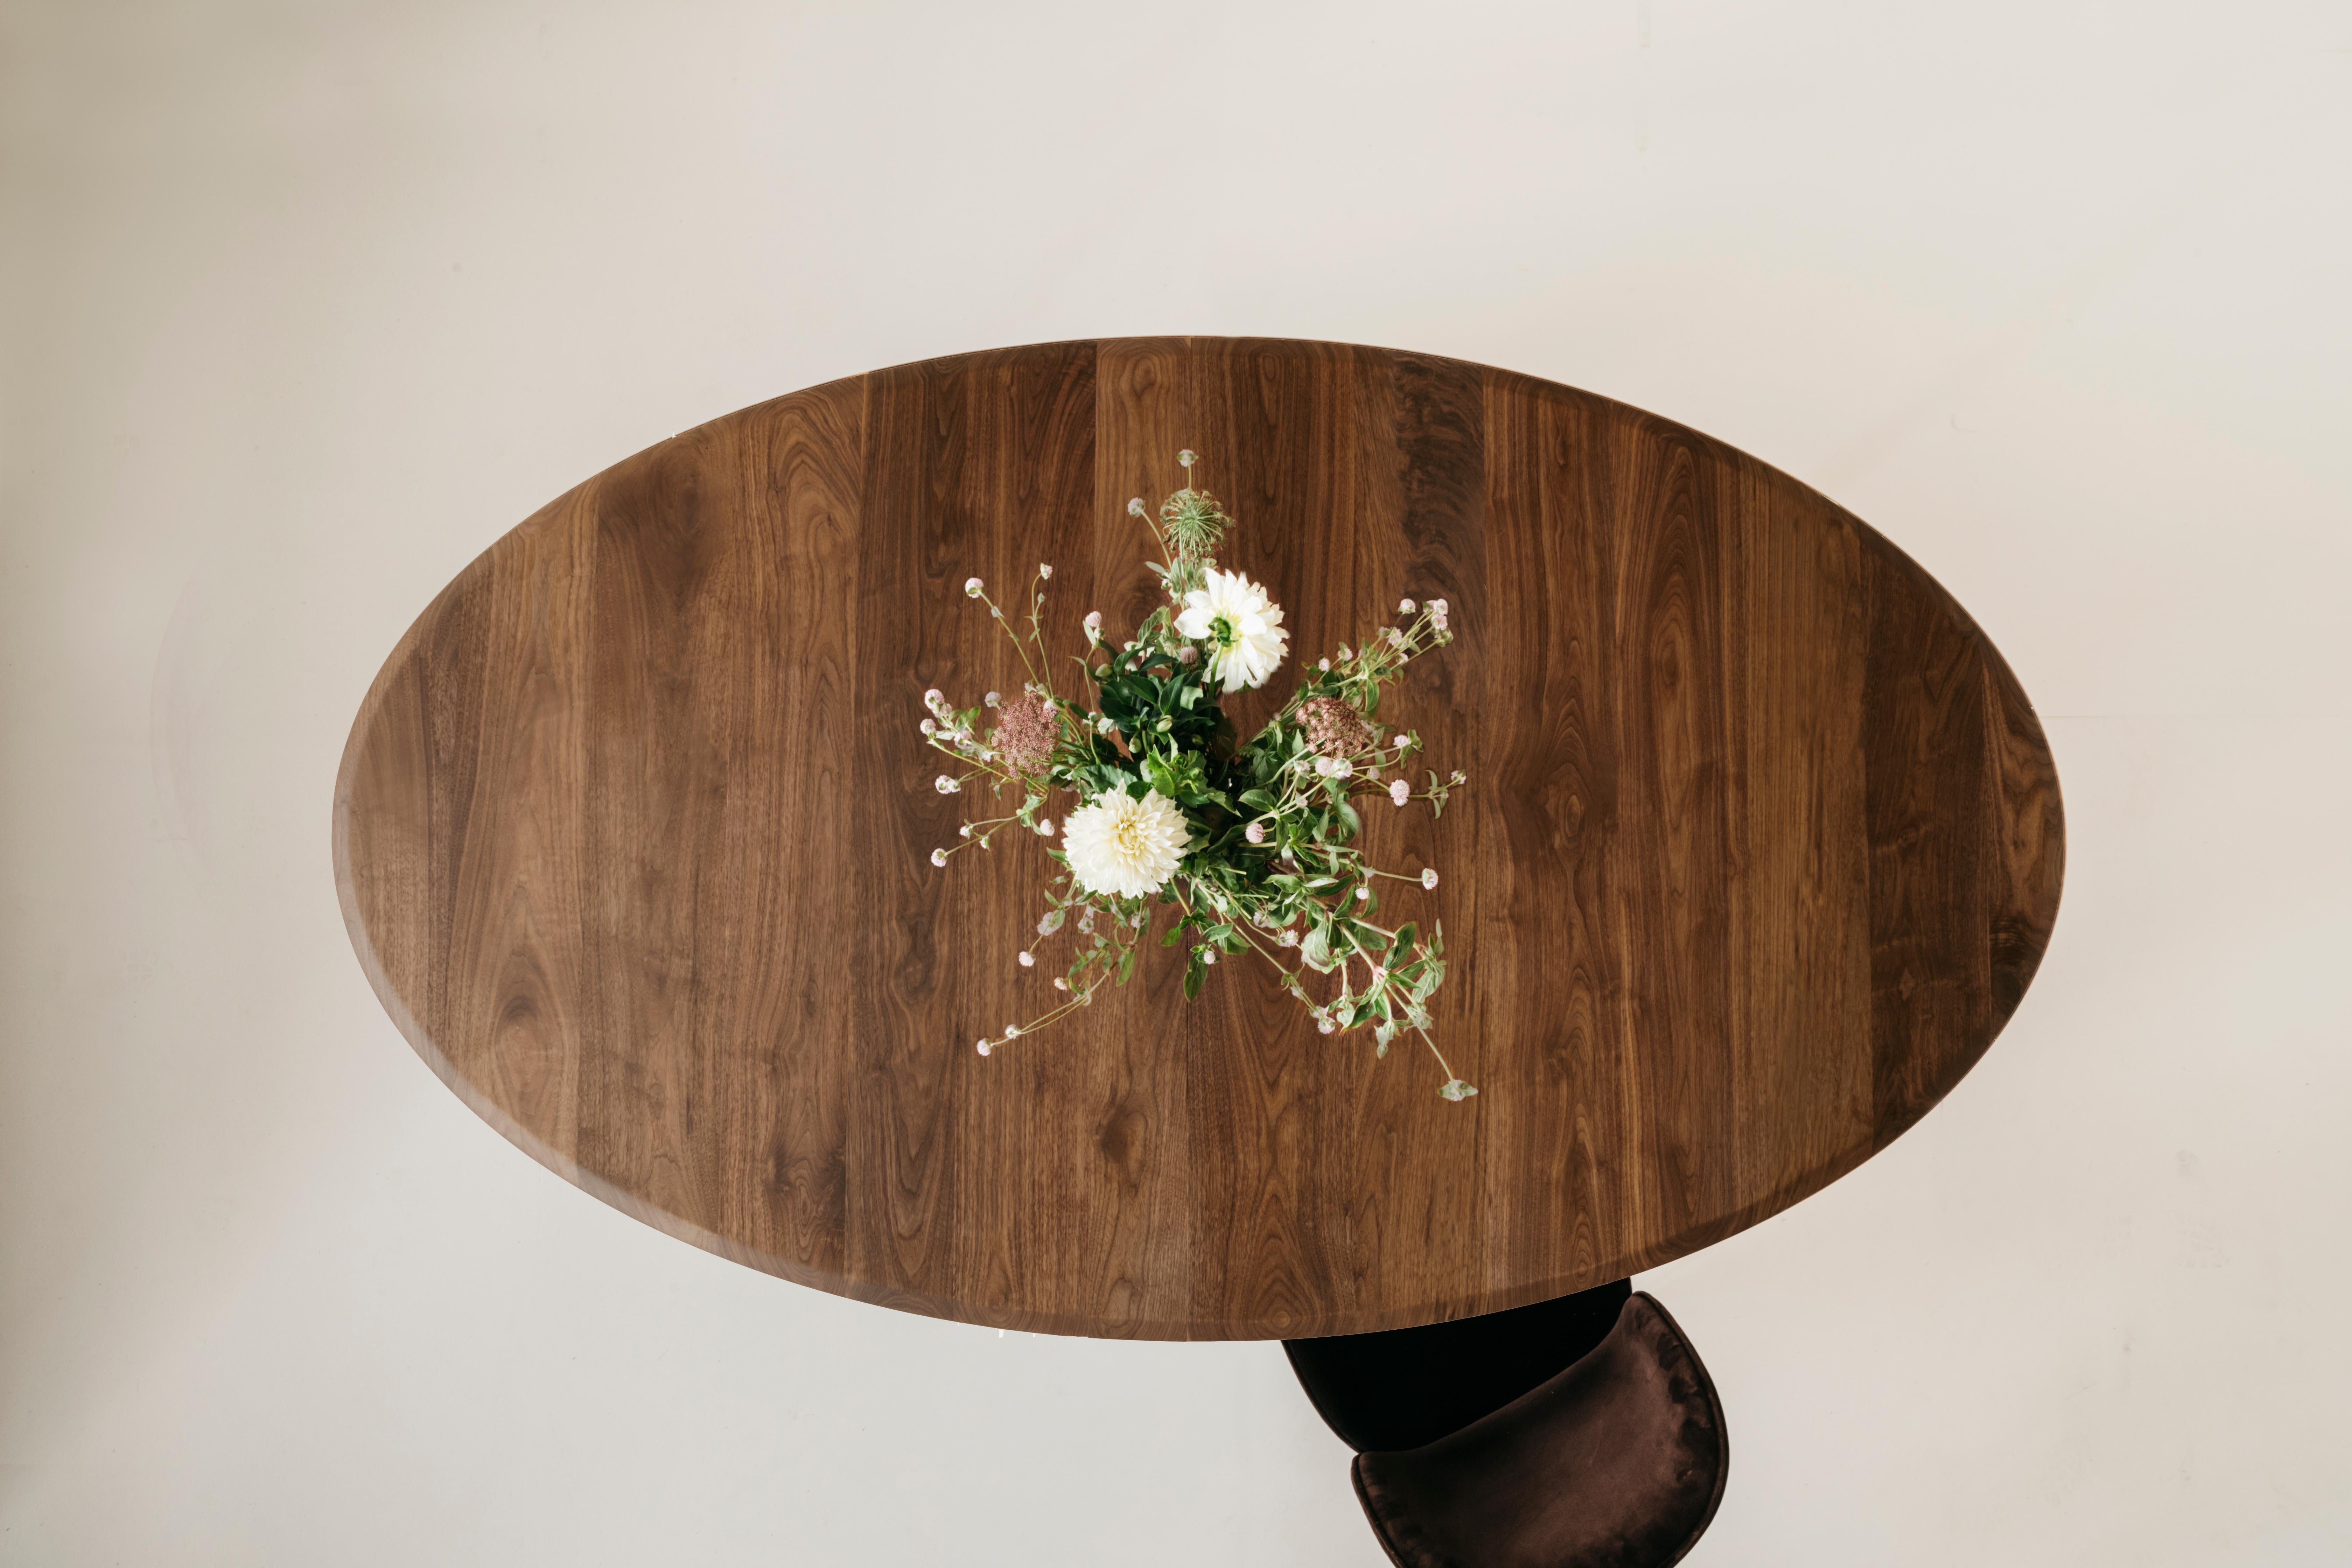 The Richard Watson oval dining table provides a comfortable, intimate shape to dine with others. This table has an option to extend by use of smooth extension hardware that expands to hold a 20” leaf,

Each Richard Watson piece is made in